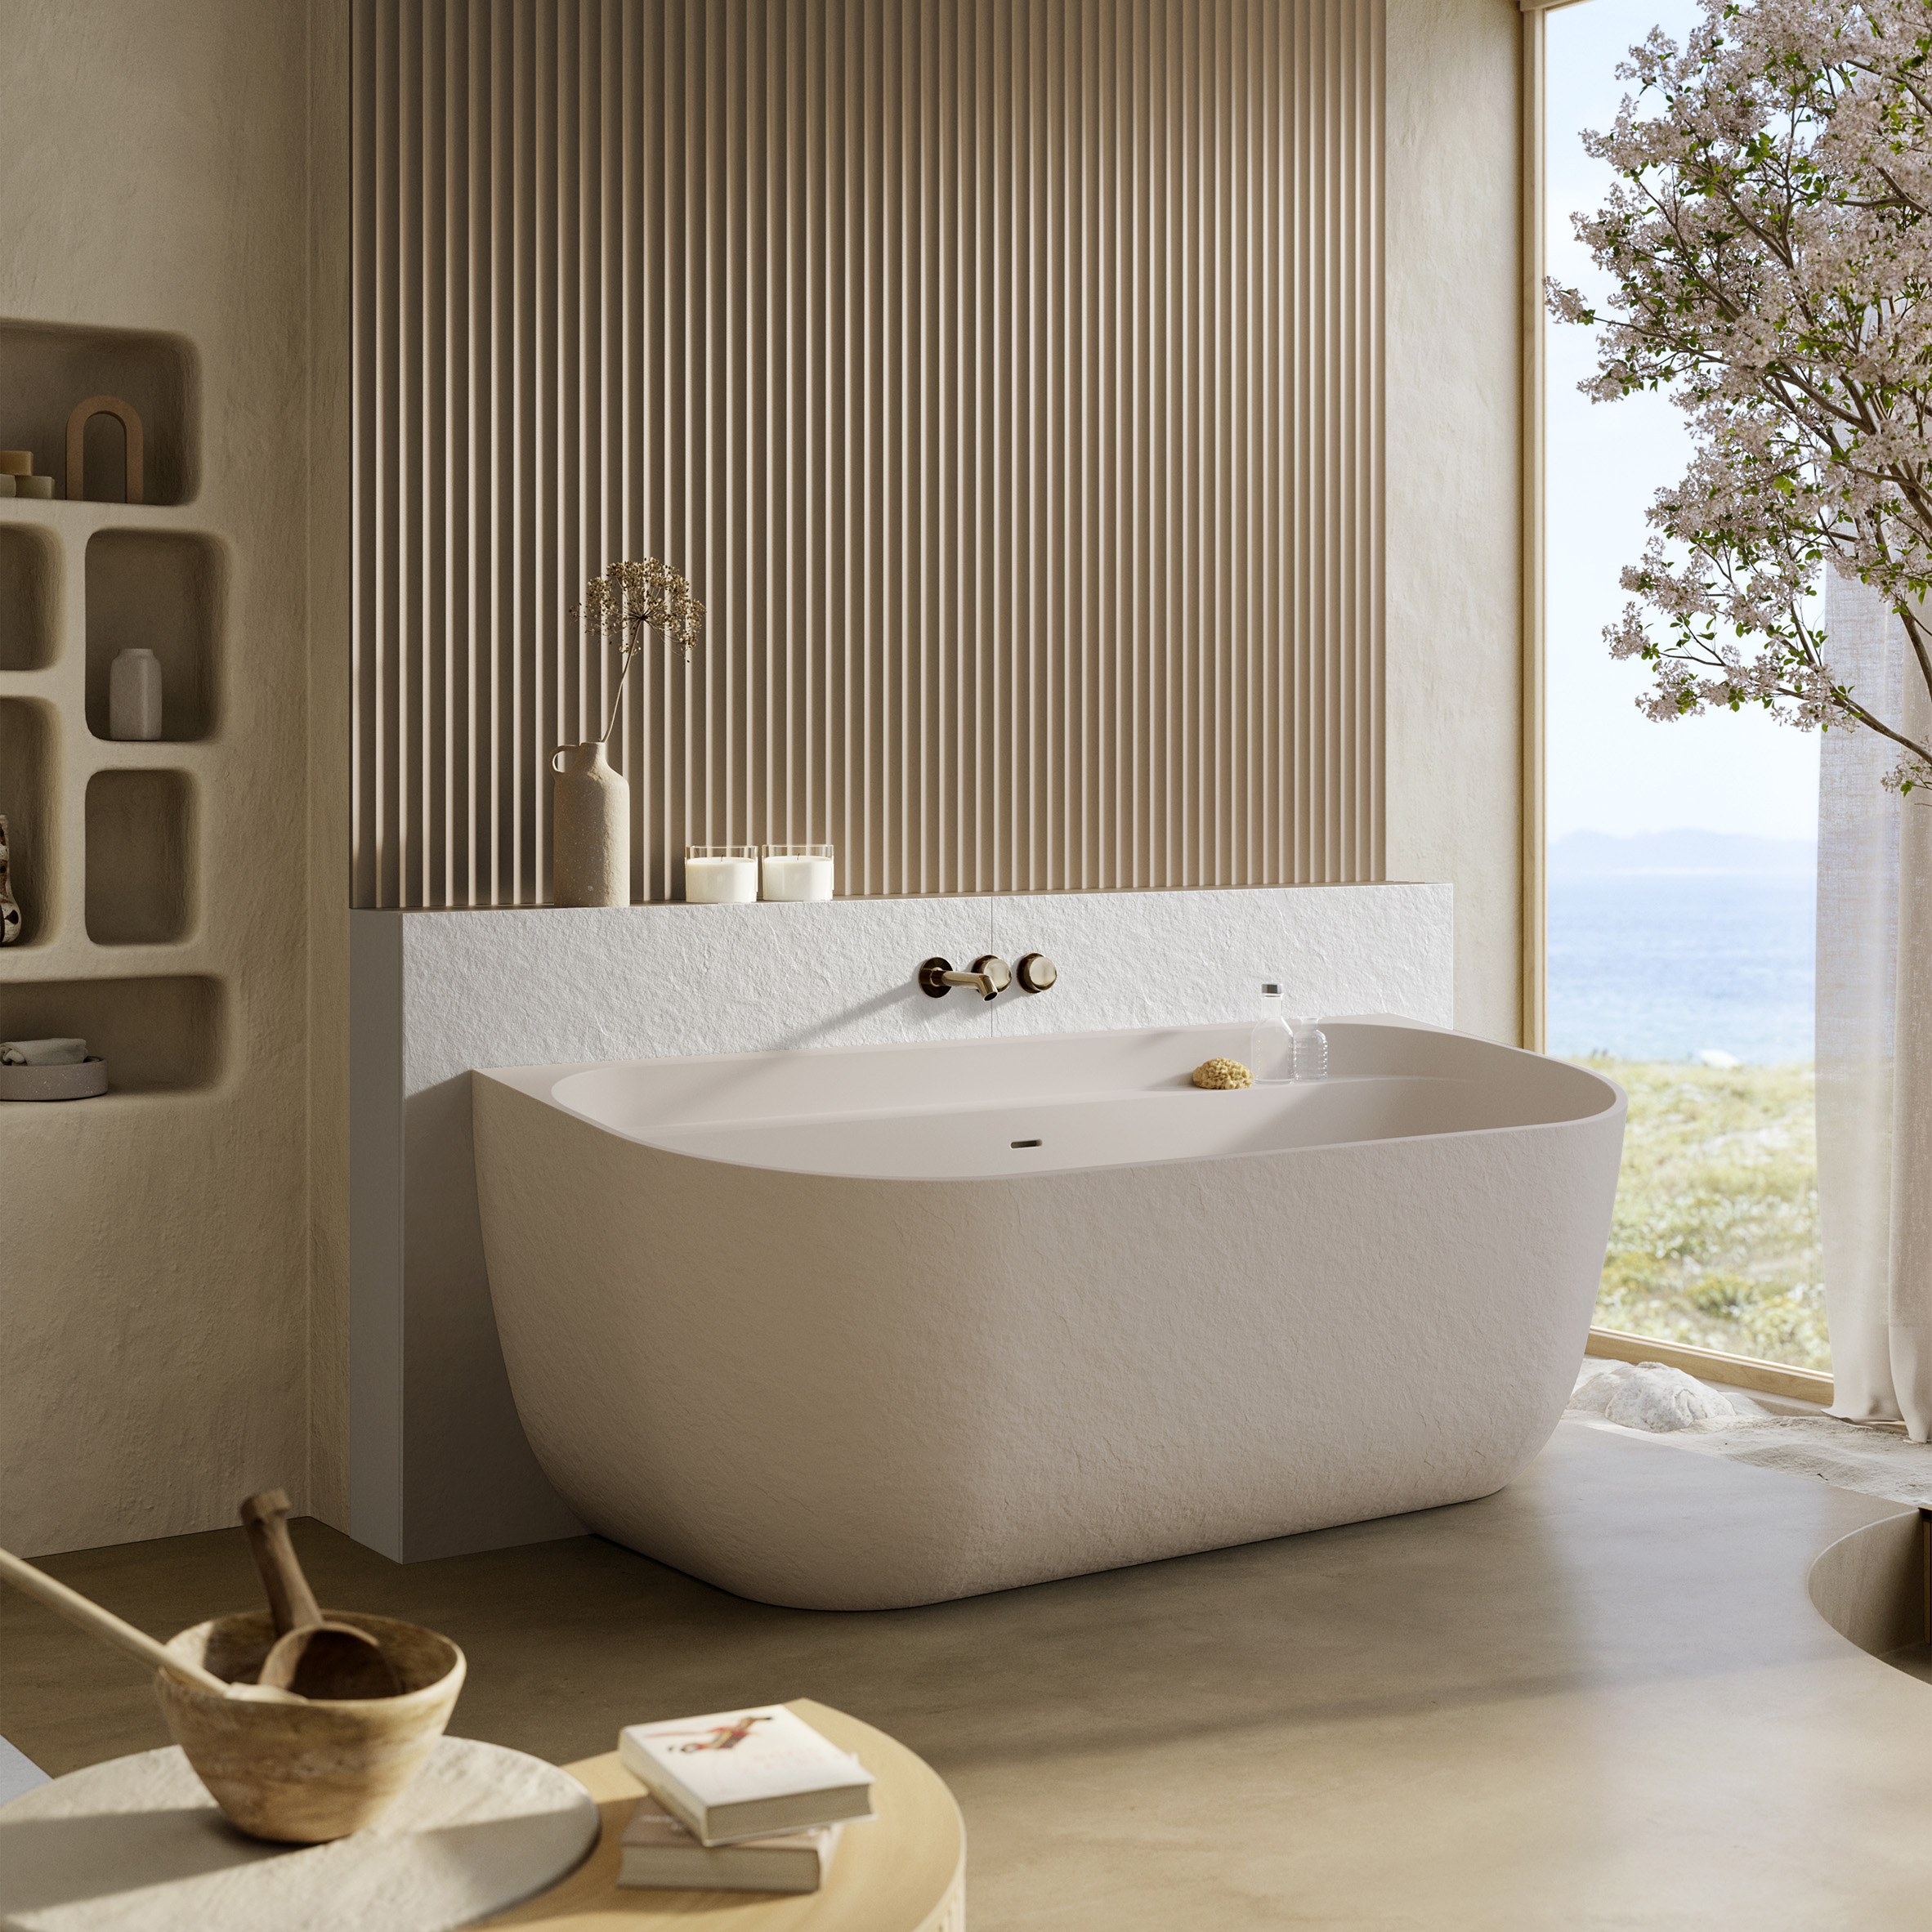 Photo of a large, pale pink built-in bathtub in a luxurious bathroom